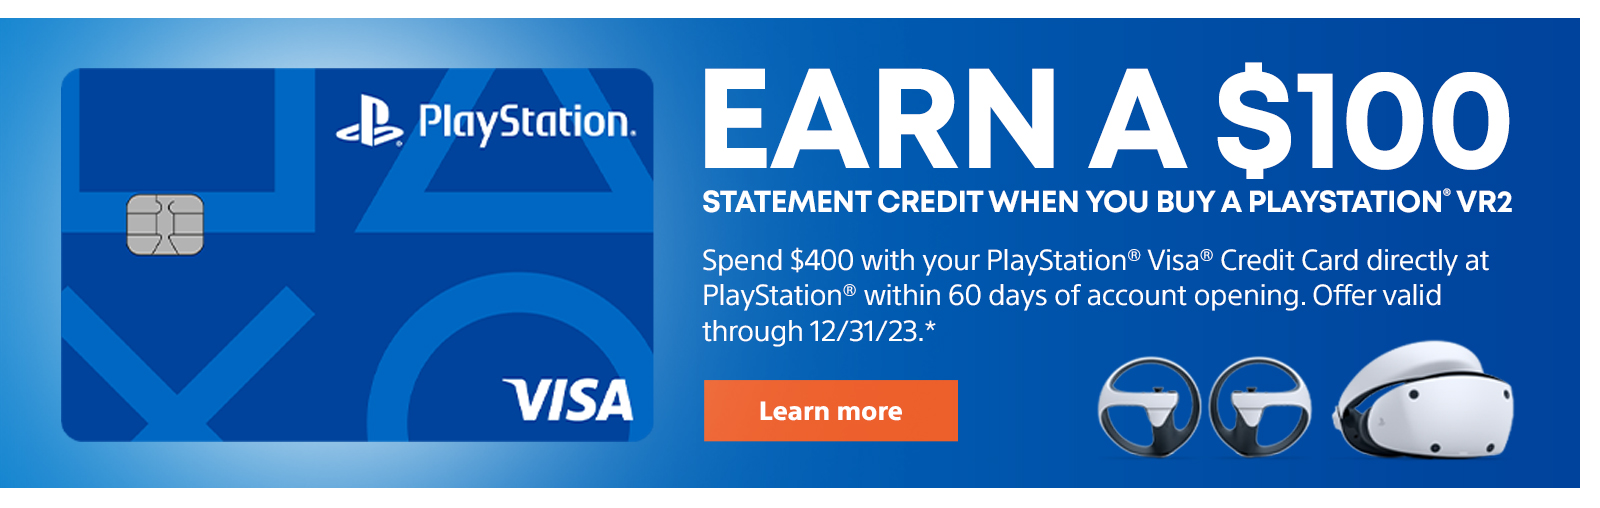 Earn a $100 statement credit when you buy a PlayStation VR2. Use the PlayStation Visa Credit Card to spend $400 directly at PlayStation within 60 days of account opening. Offer valid through 12/31/23.